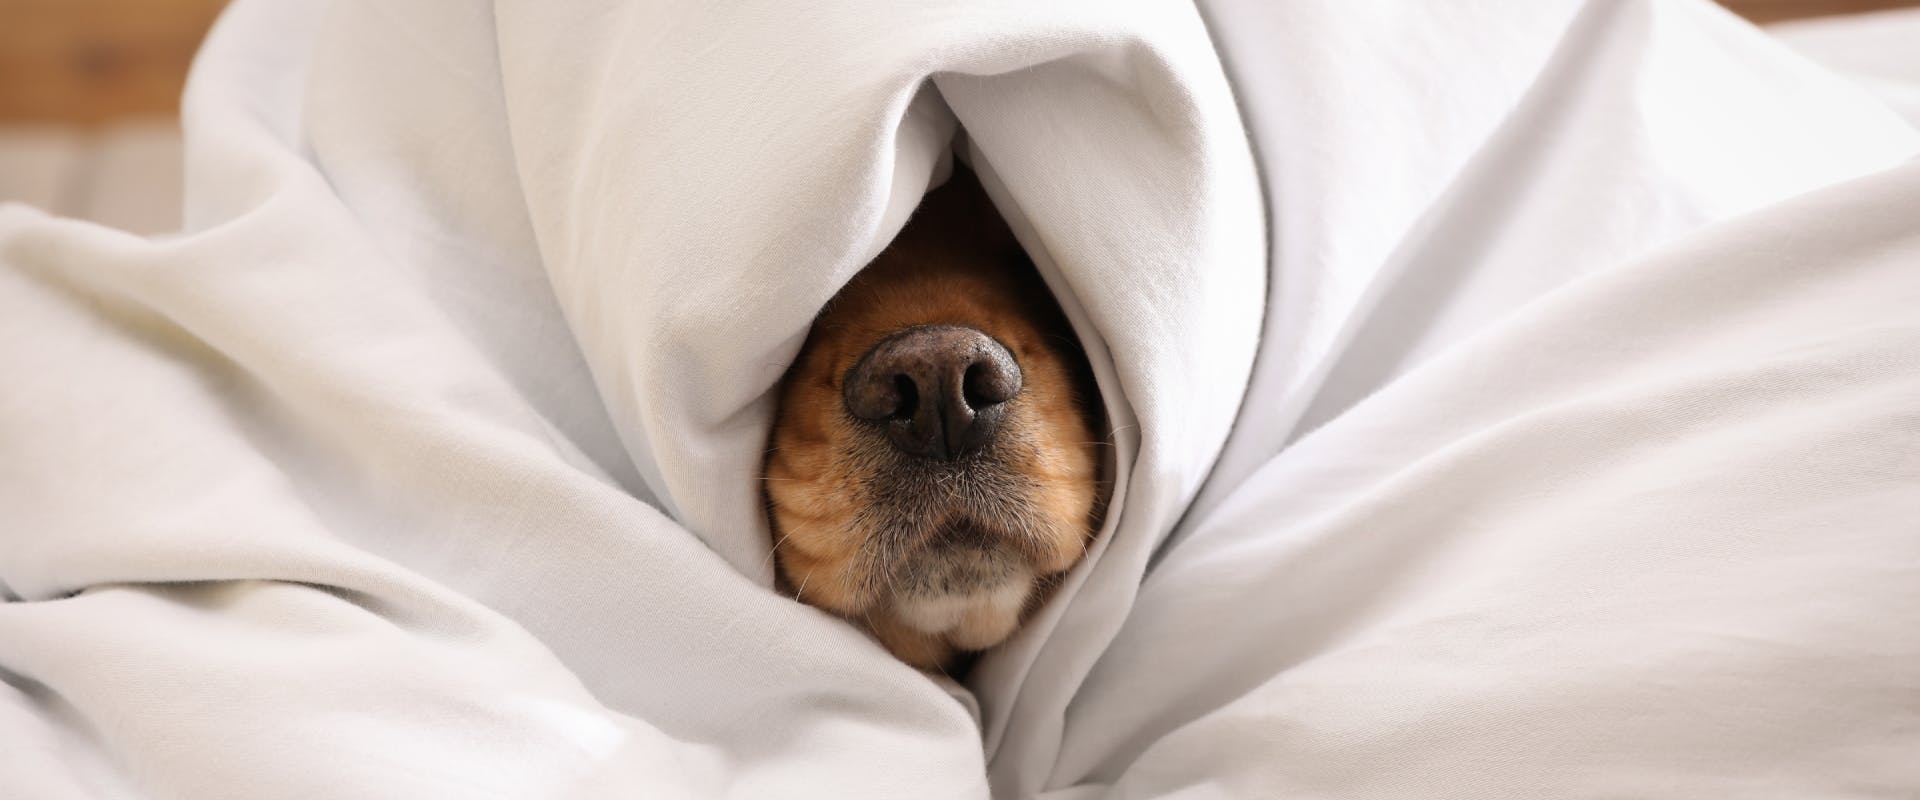 a brown dog nose poking out from the rolls of a white duvet